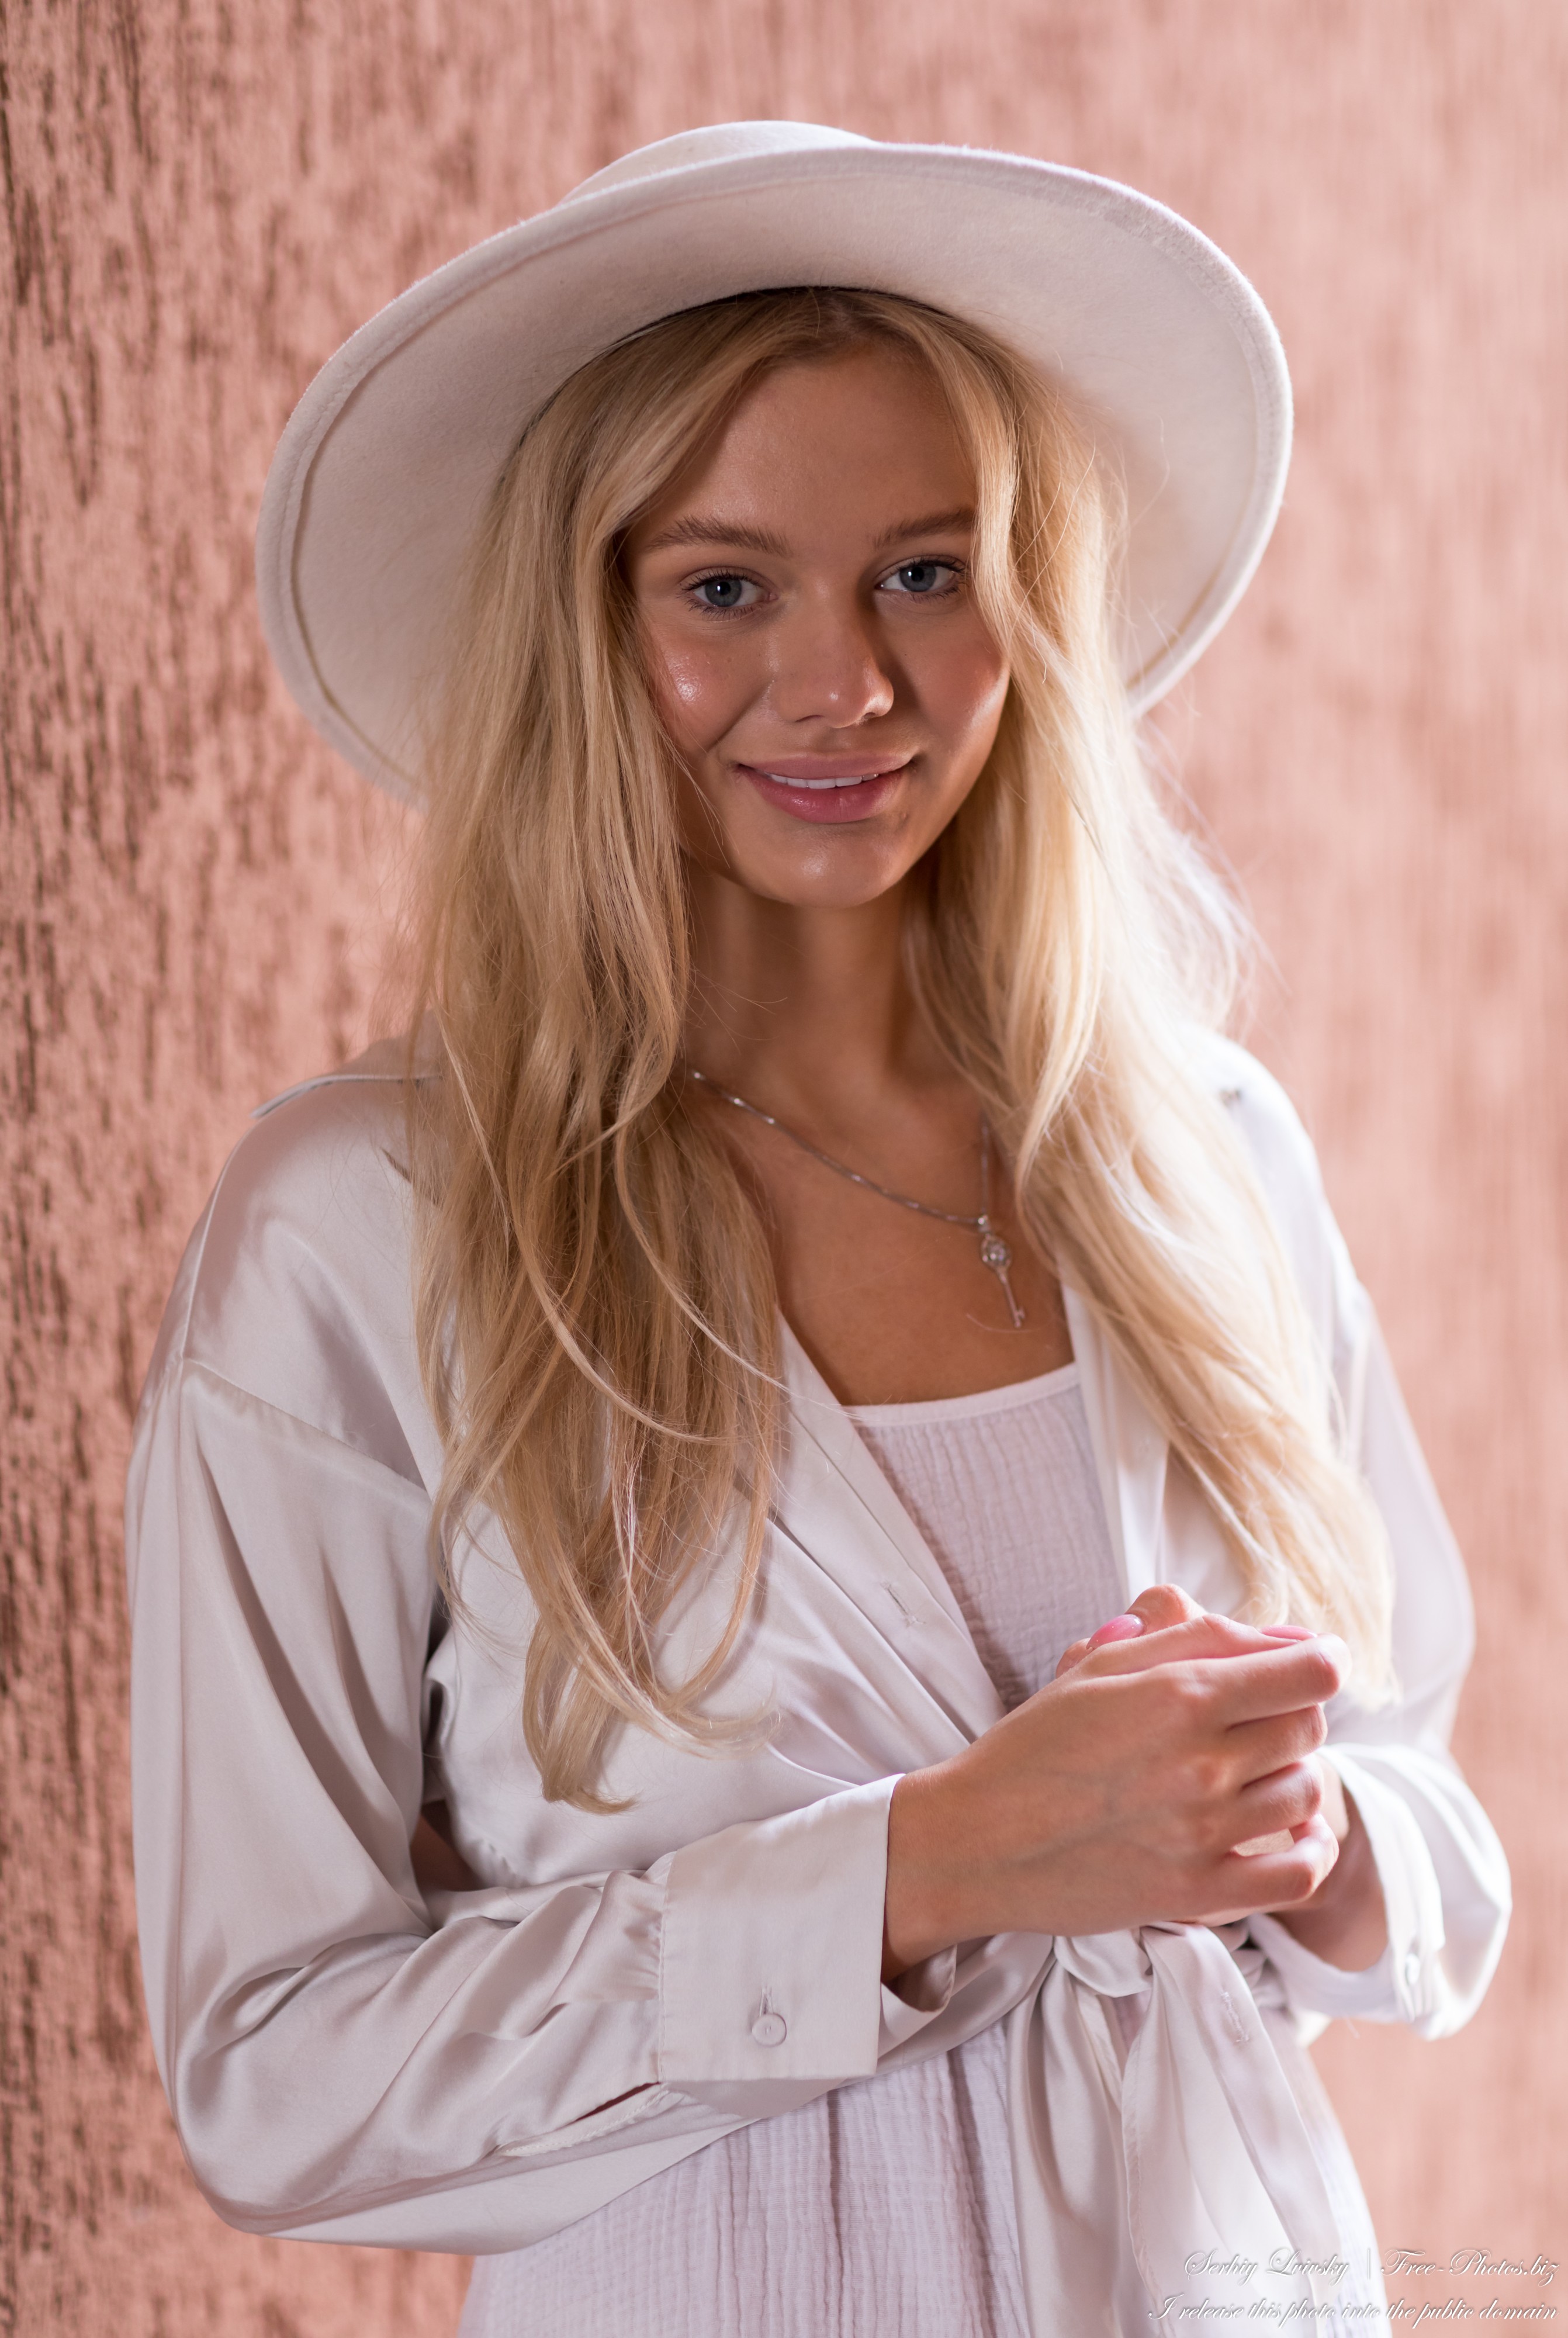 Oksana - a natural blonde 19-year-old girl photographed in July 2021 by Serhiy Lvivsky, picture 16